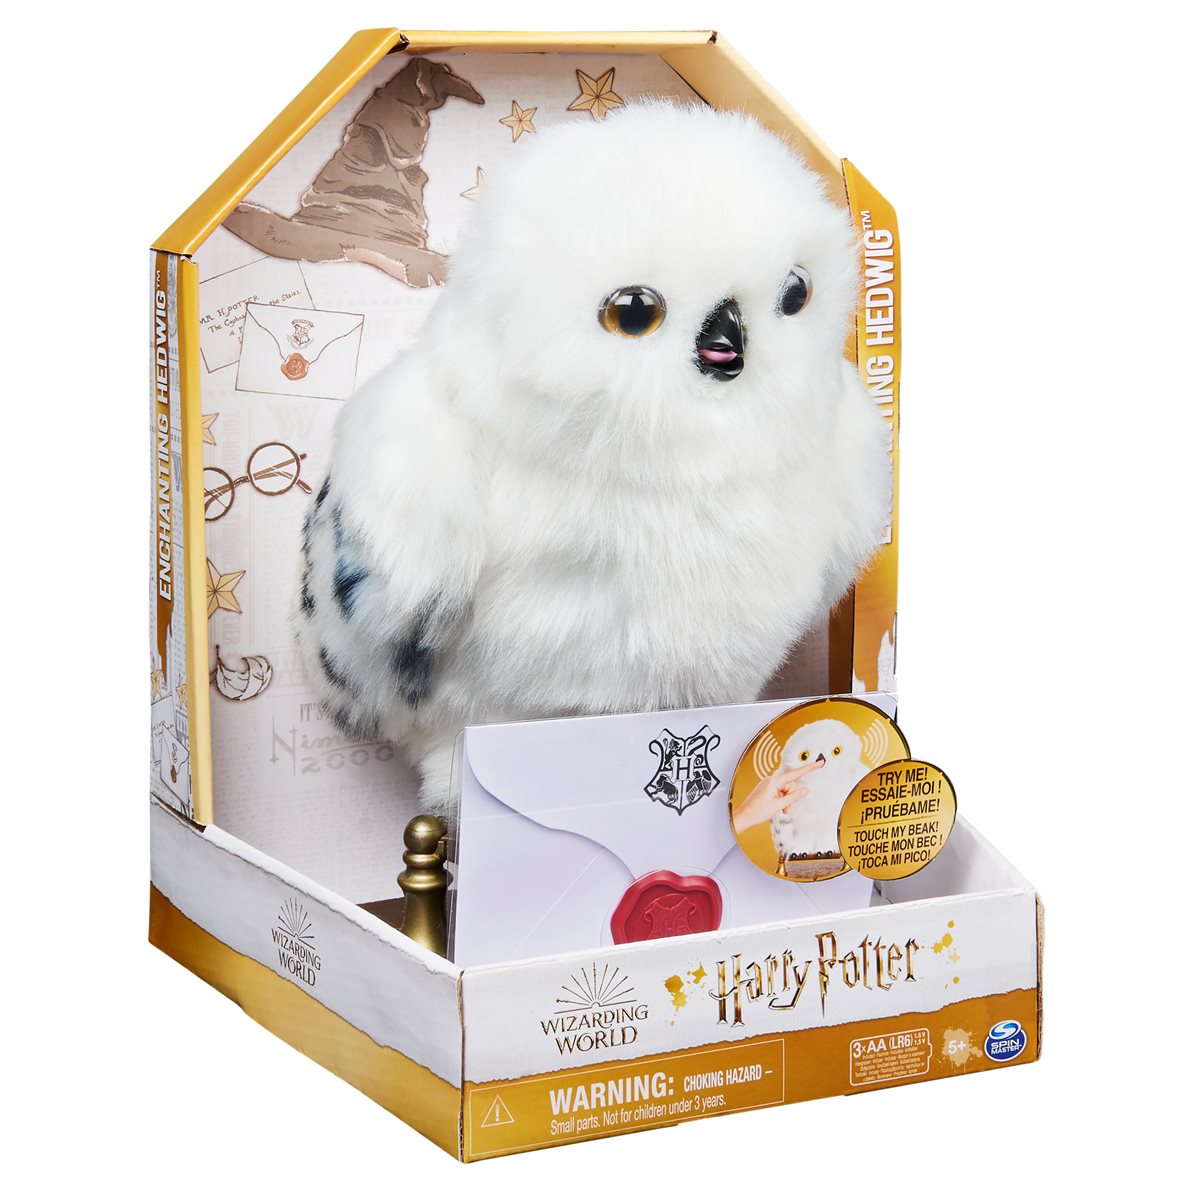 Official Harry Potter Charm 429026: Buy Online on Offer